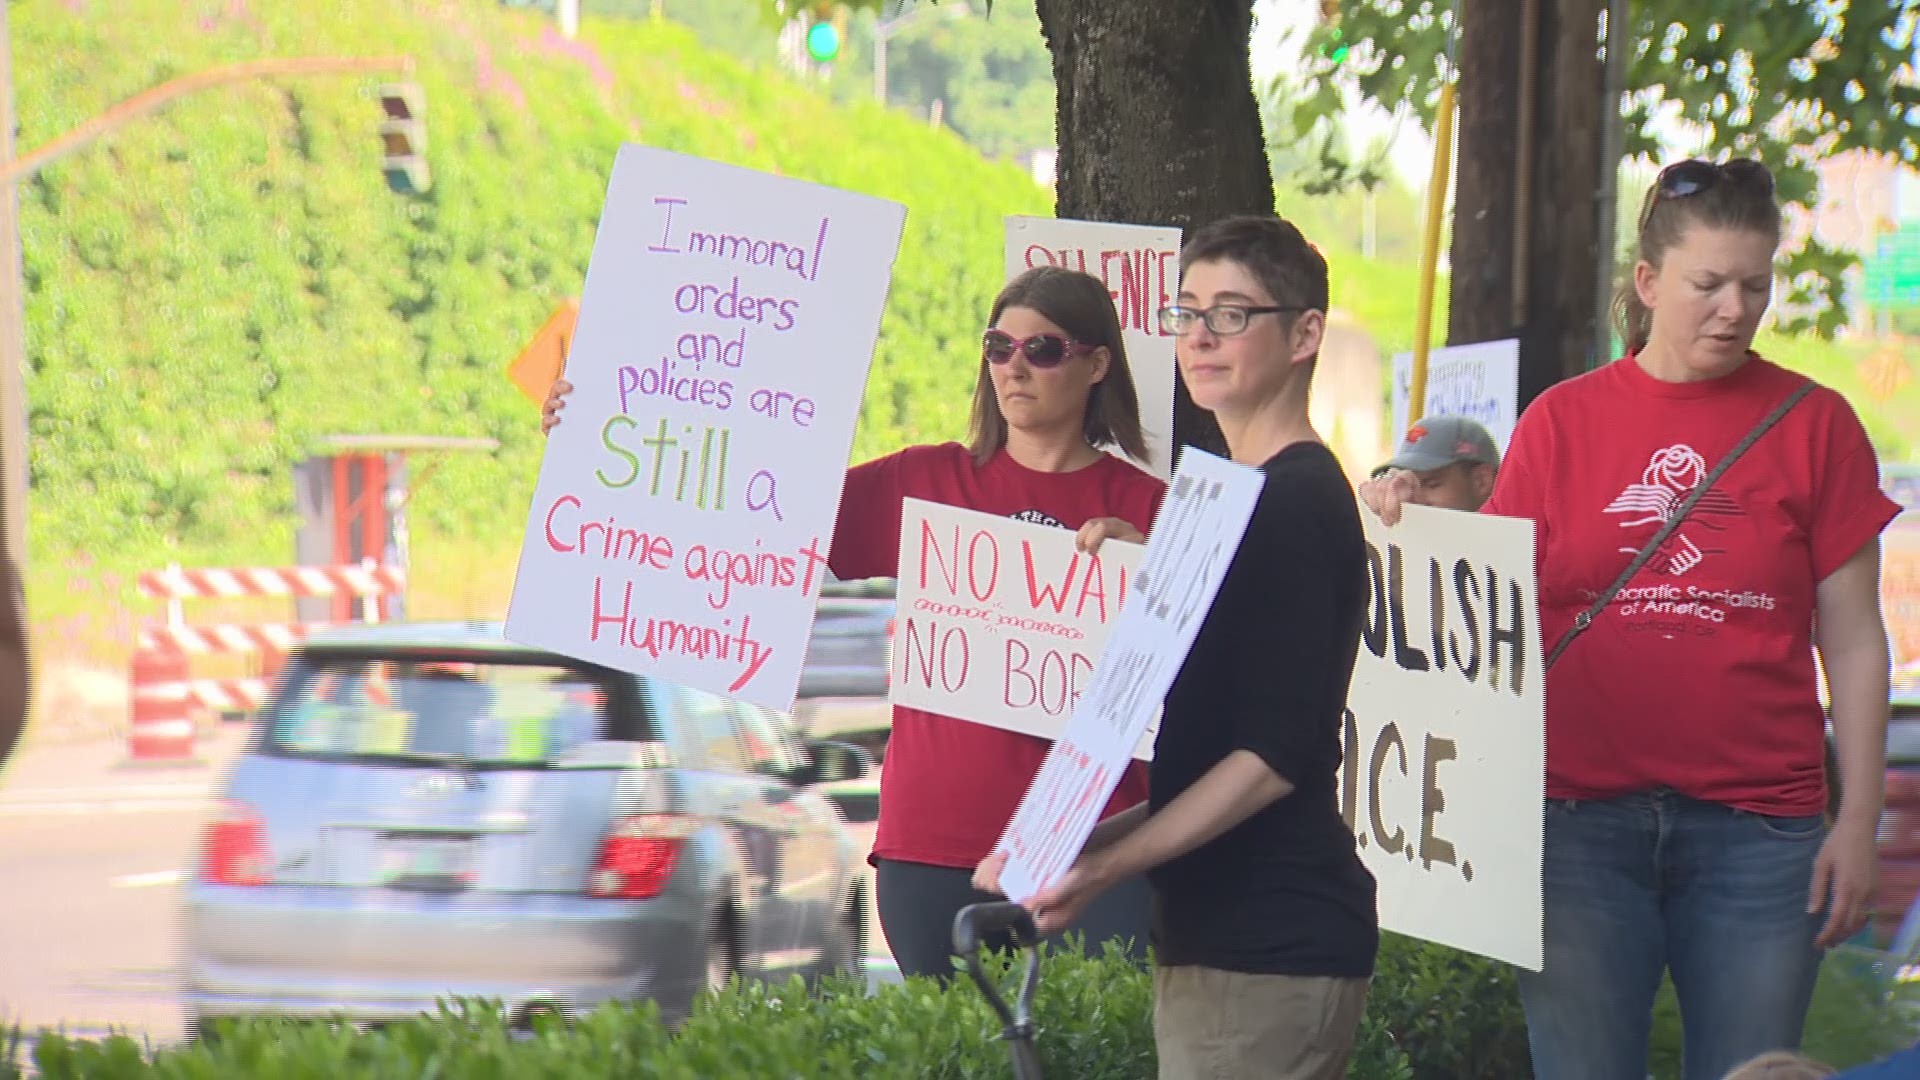 About two dozen protesters gather for a round-the-clock vigil and vow not to leave until the policy is changed. More: https://on.kgw.com/2K9RI7M